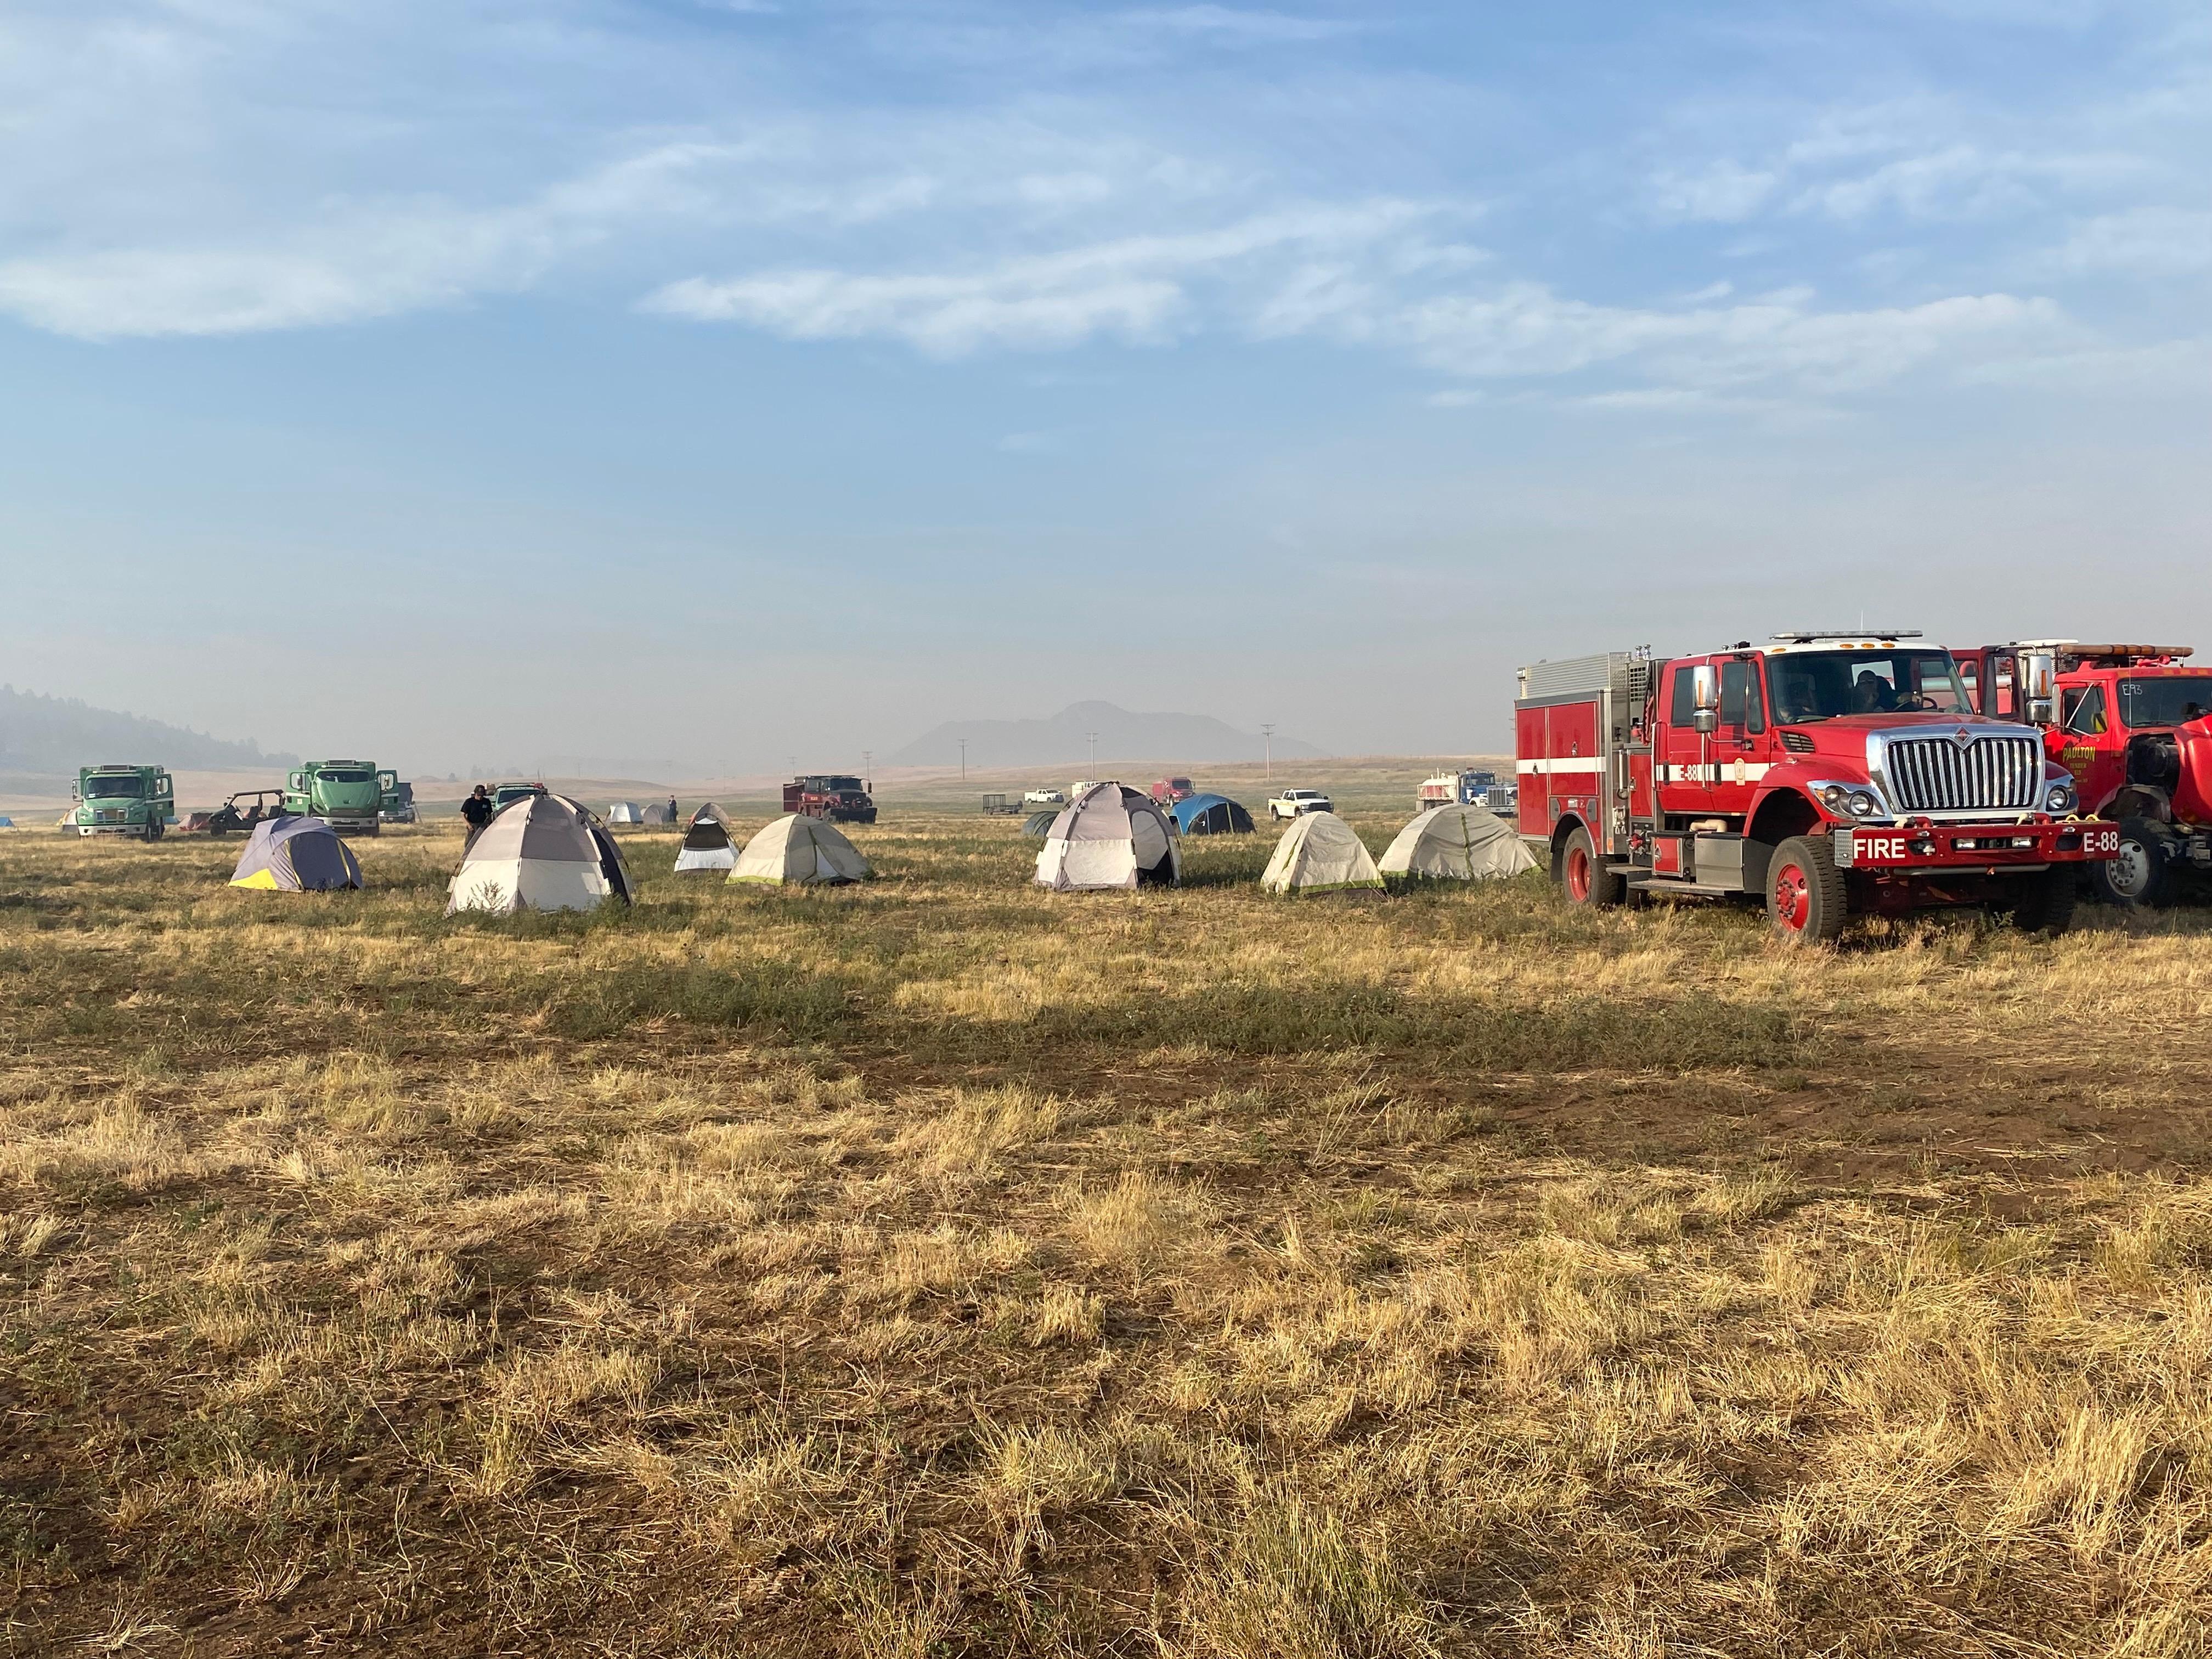 Engines and firefighter tents at forward operation base